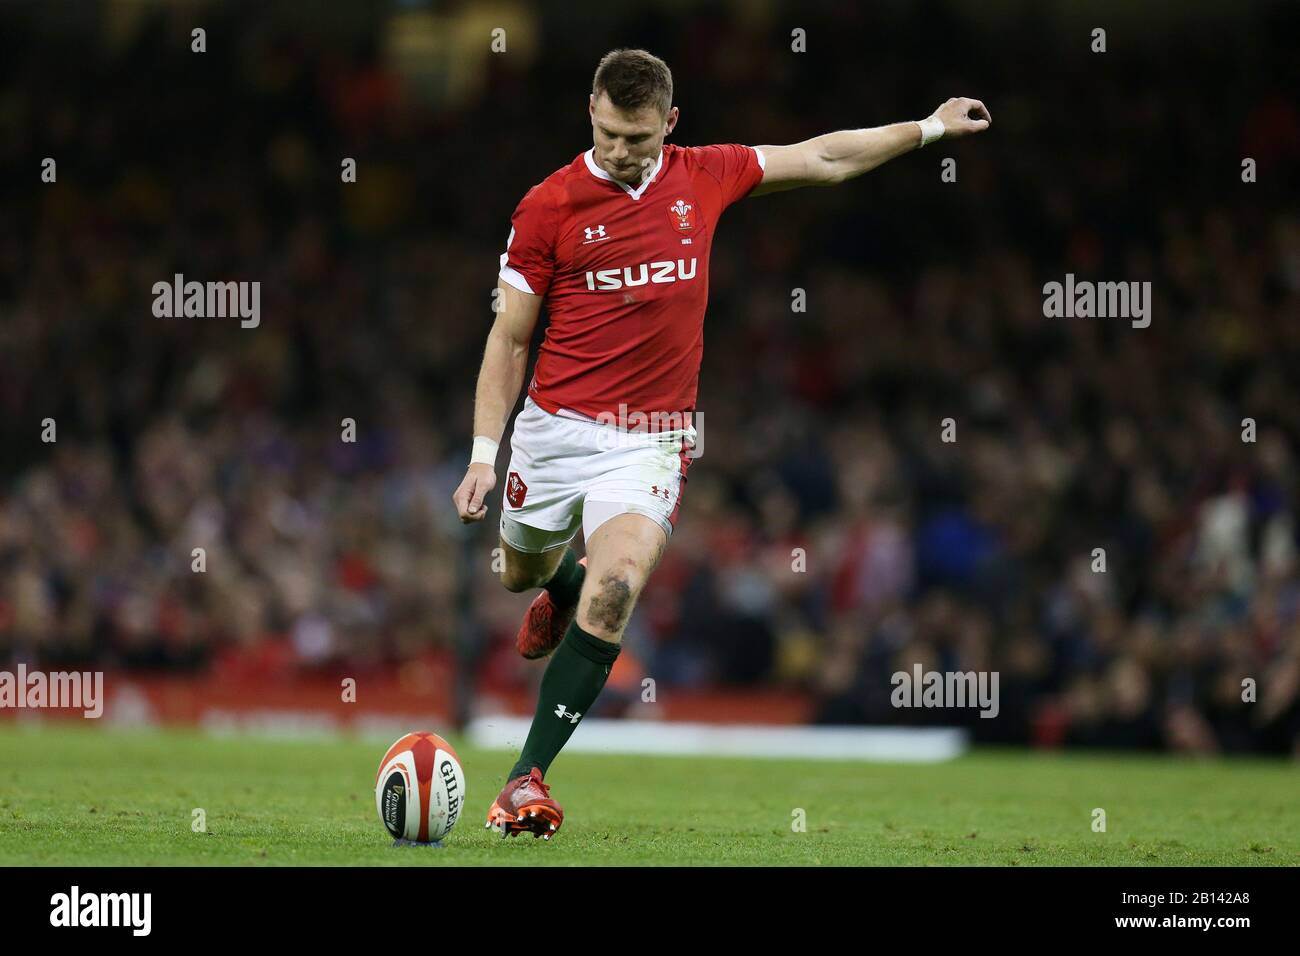 Cardiff, UK. 22nd Feb, 2020. Dan Biggar of Wales kicks a penalty. Wales v France, Guinness Six Nations championship 2020 international rugby match at the Principality Stadium in Cardiff, Wales, UK on Saturday 22nd February 2020. pic by Andrew Orchard/Alamy Live News PLEASE NOTE PICTURE AVAILABLE FOR EDITORIAL USE ONLY Stock Photo